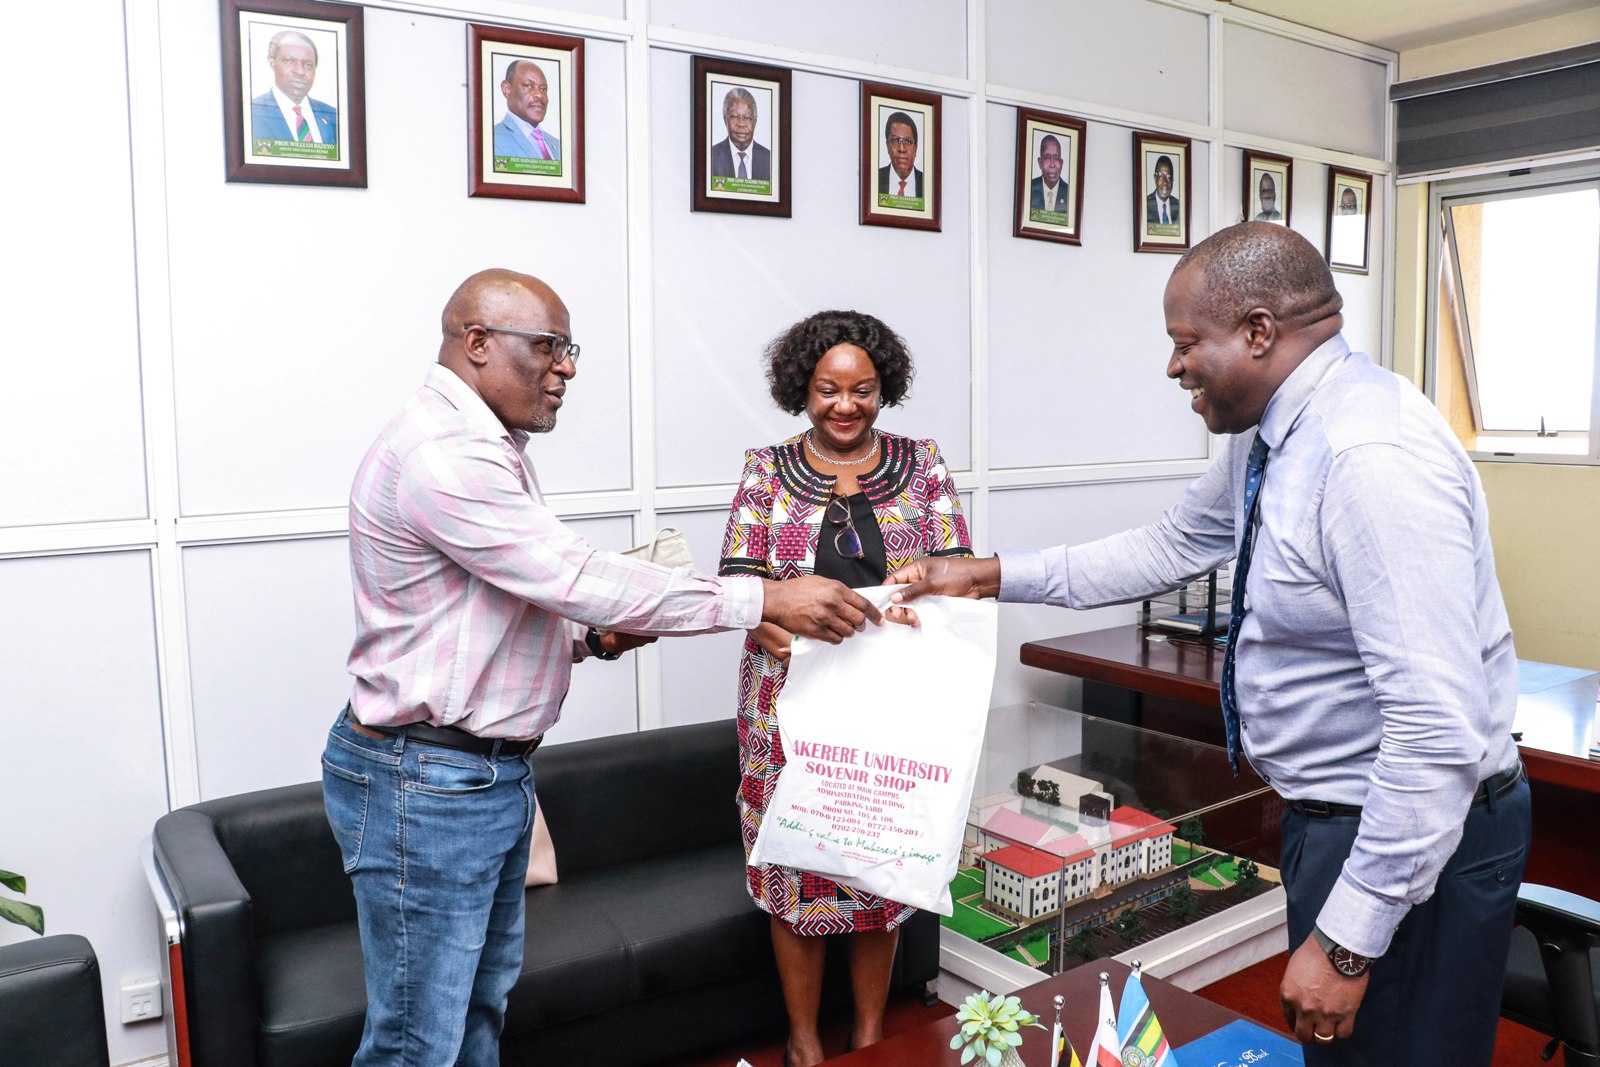 The Acting Deputy Vice Chancellor Finance & Administration, Prof. Tonny J. Oyana (R) presents an assortment of Makerere University souvenirs to BMGF's Dr. William Sambisa (L) during the courtesy call on 4th July 2022, Frank Kalimuzo Central Teaching Facility. Centre is the Dean MakSPH, Prof. Rhoda Wanyenze.